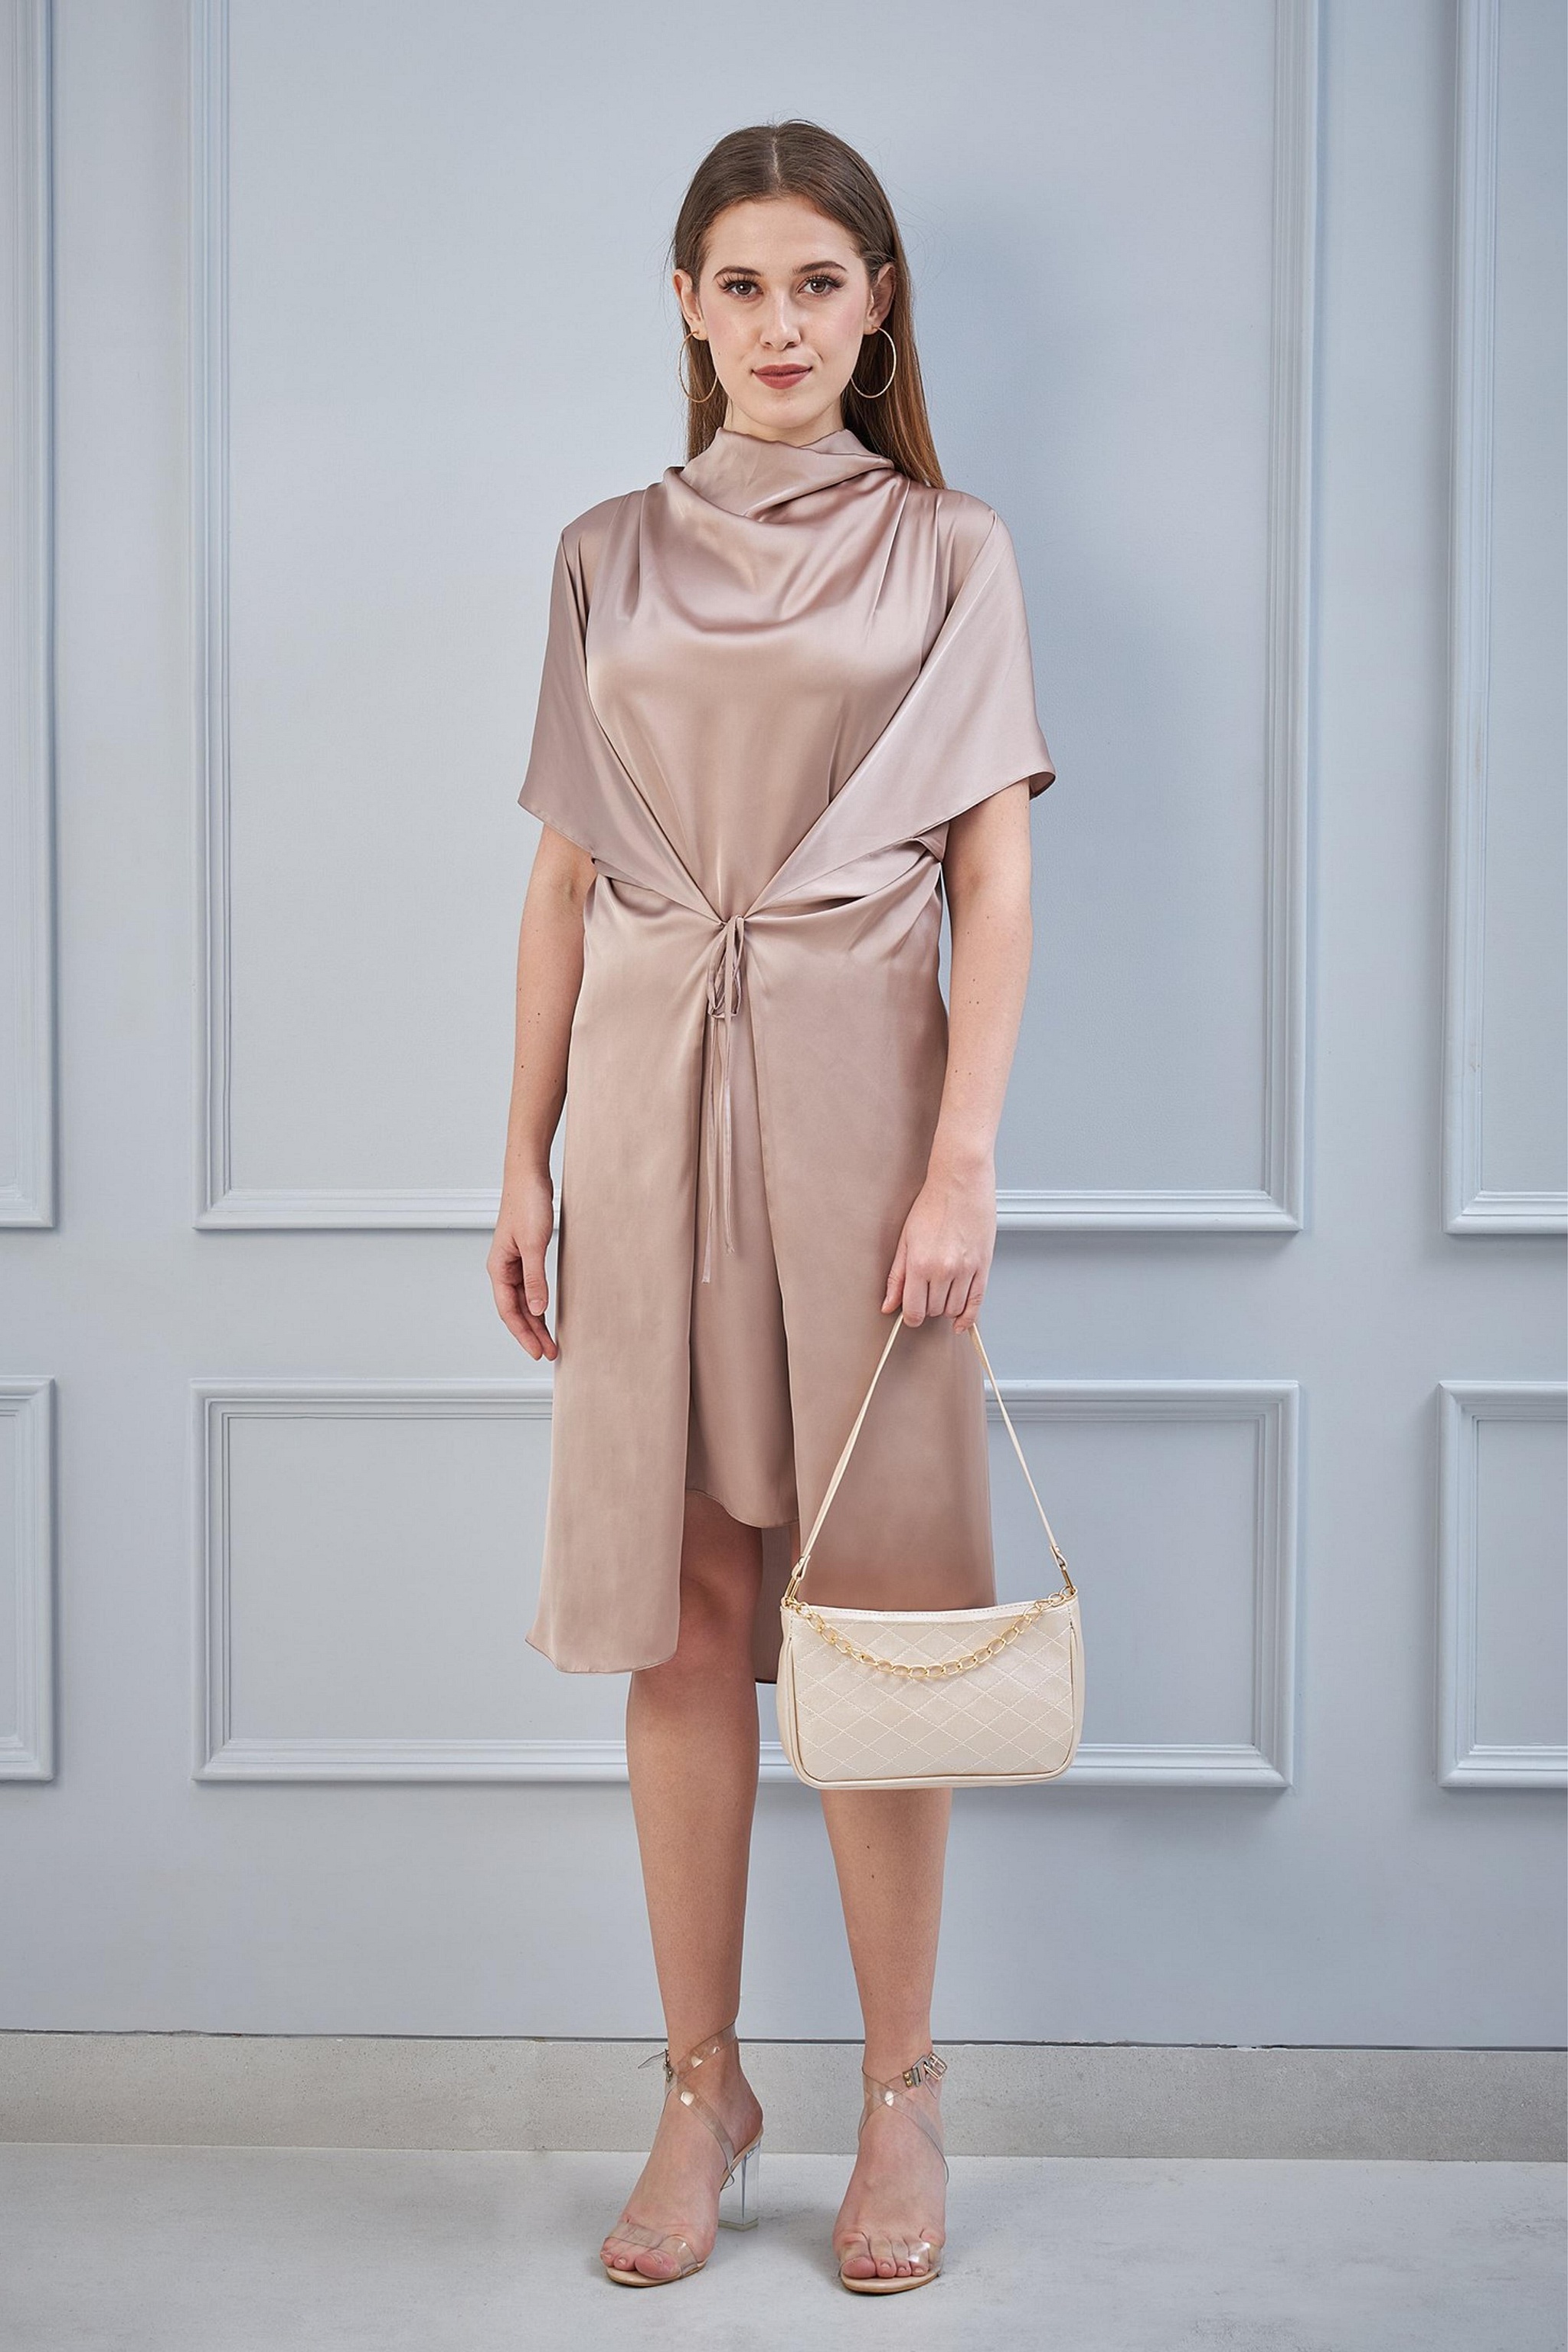 Dull Nude Drape Dress With Tie Up Flap